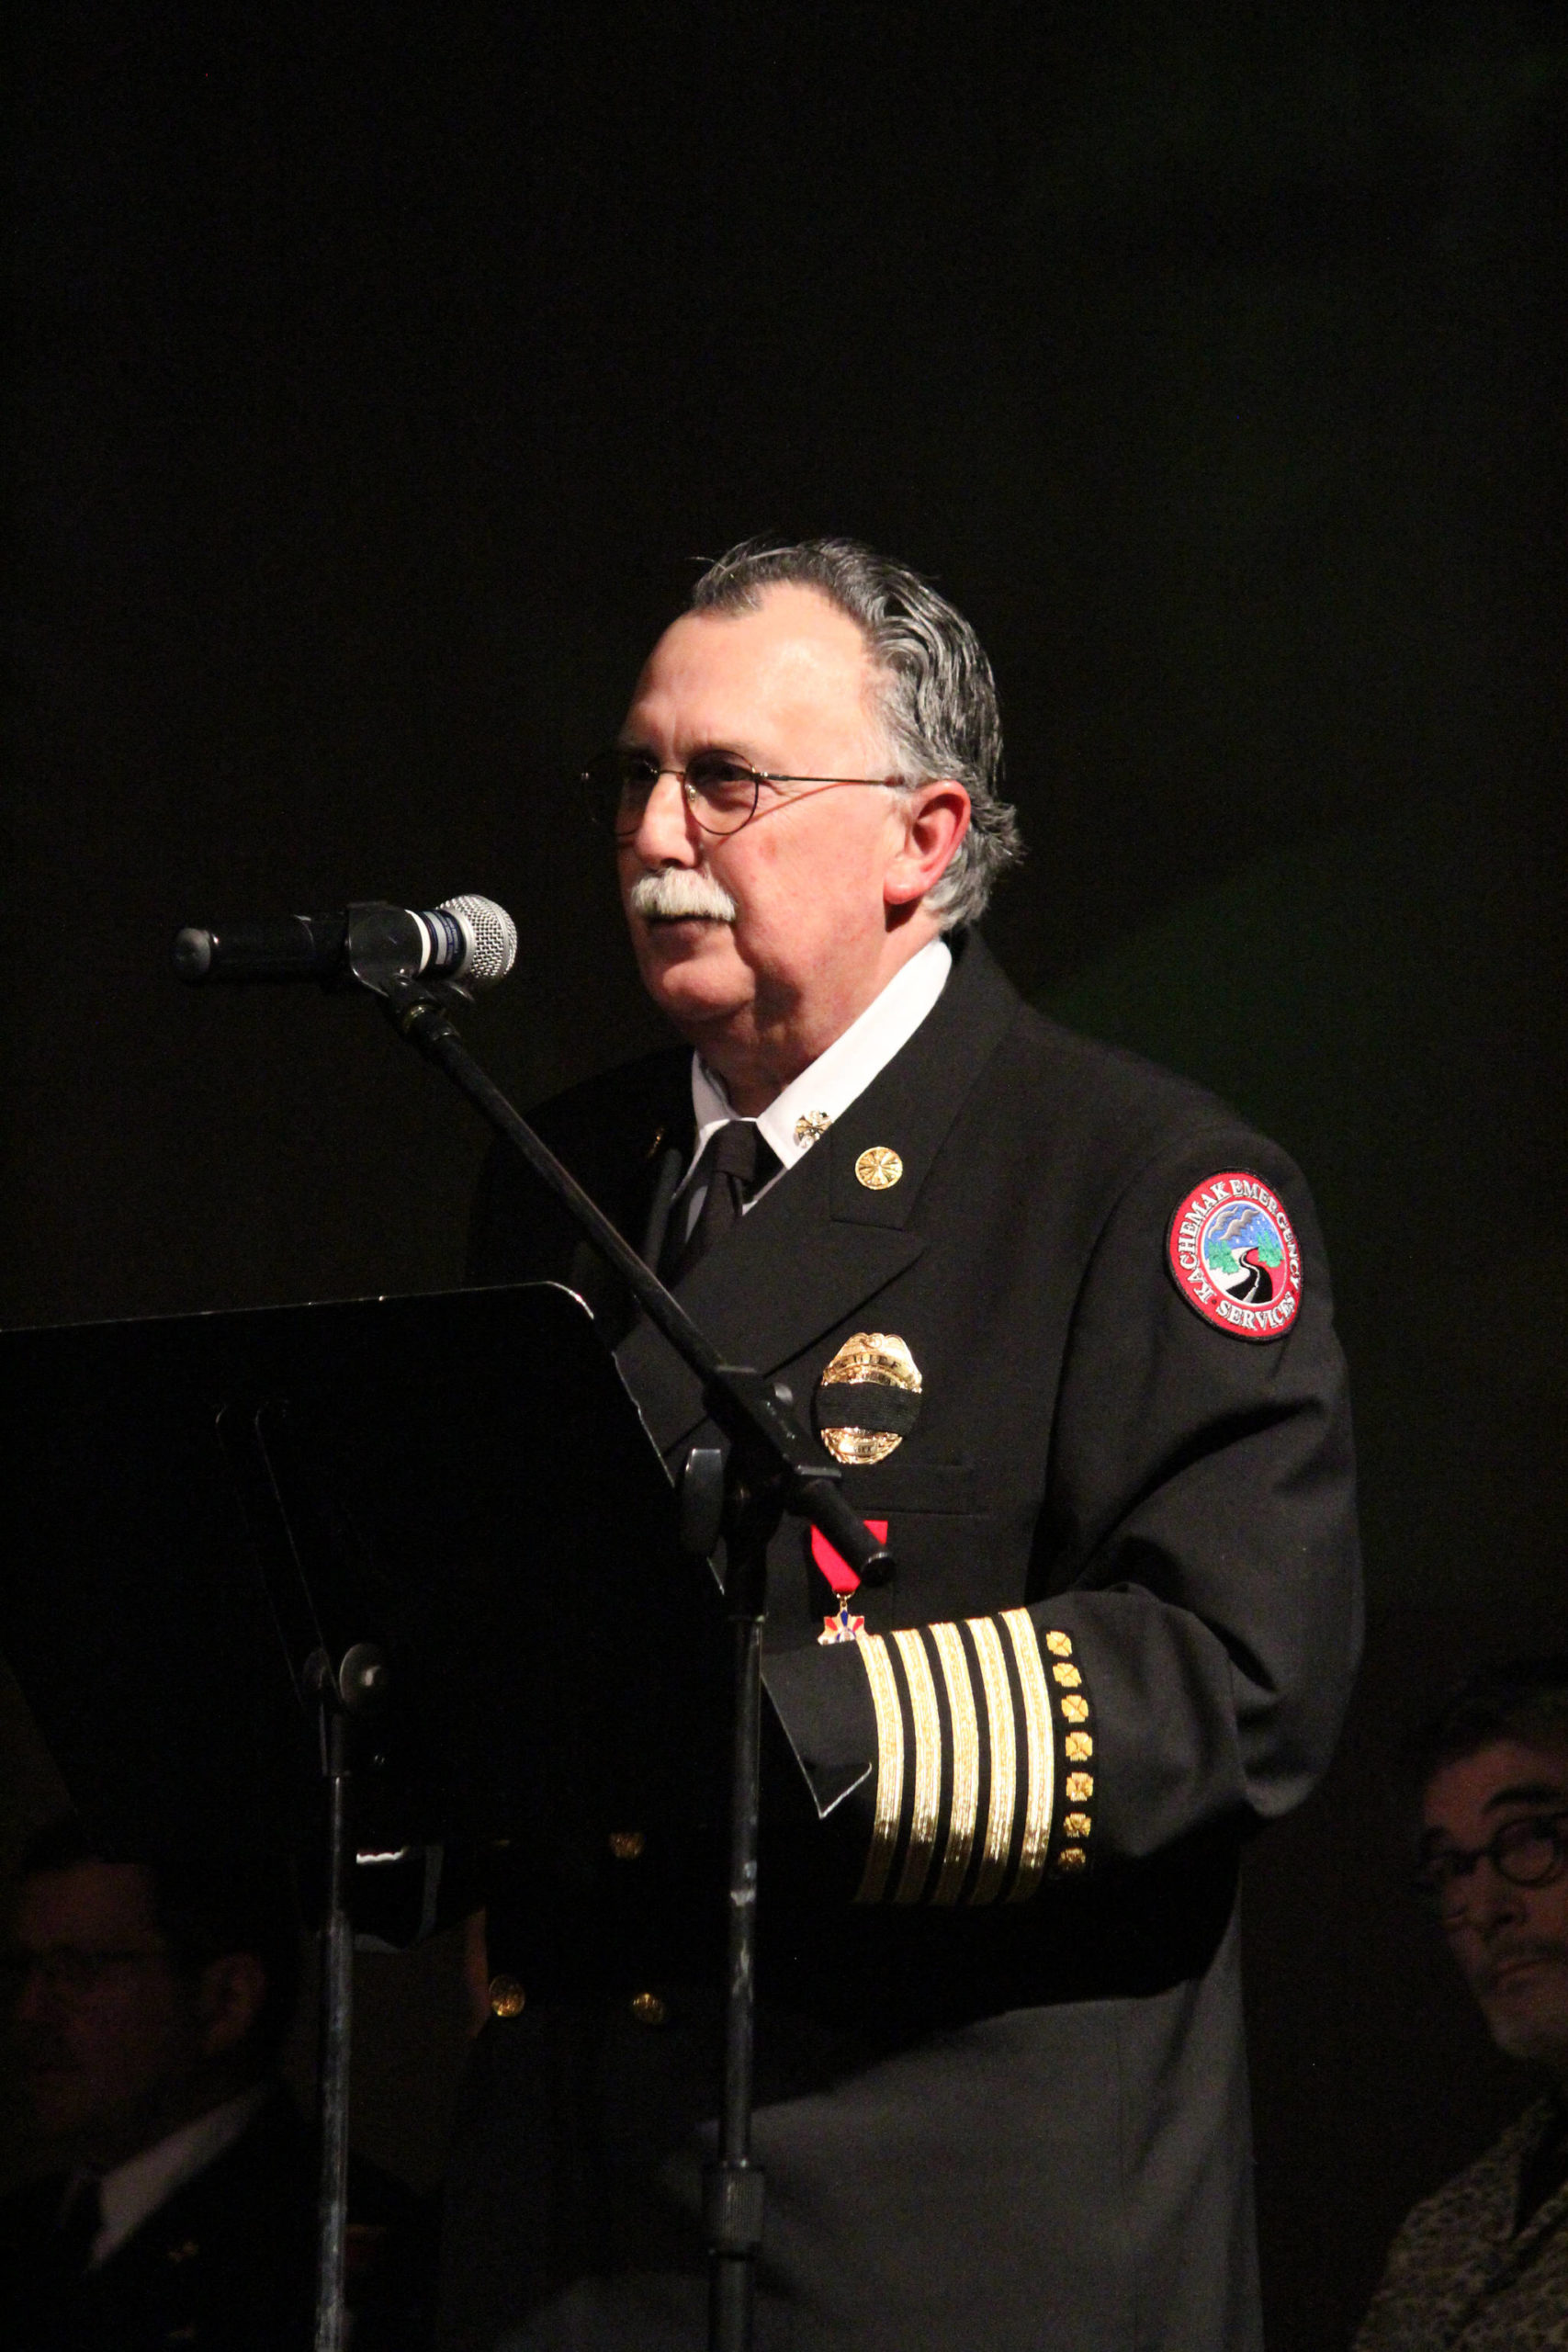 Kachemak Emergency Services Chief Bob Cicciarella speaks during a Sunday, Jan. 19, 2020 memorial for Gary Thomas, a Homer man who was killed in a water heater explosion, held at the Homer Mariner Theatre at Homer High School in Homer, Alaska. Thomas was a volunteer firefighter for both Kachemak Emergency Services and Homer Volunteer Fire Department. (Photo by Megan Pacer/Homer News)